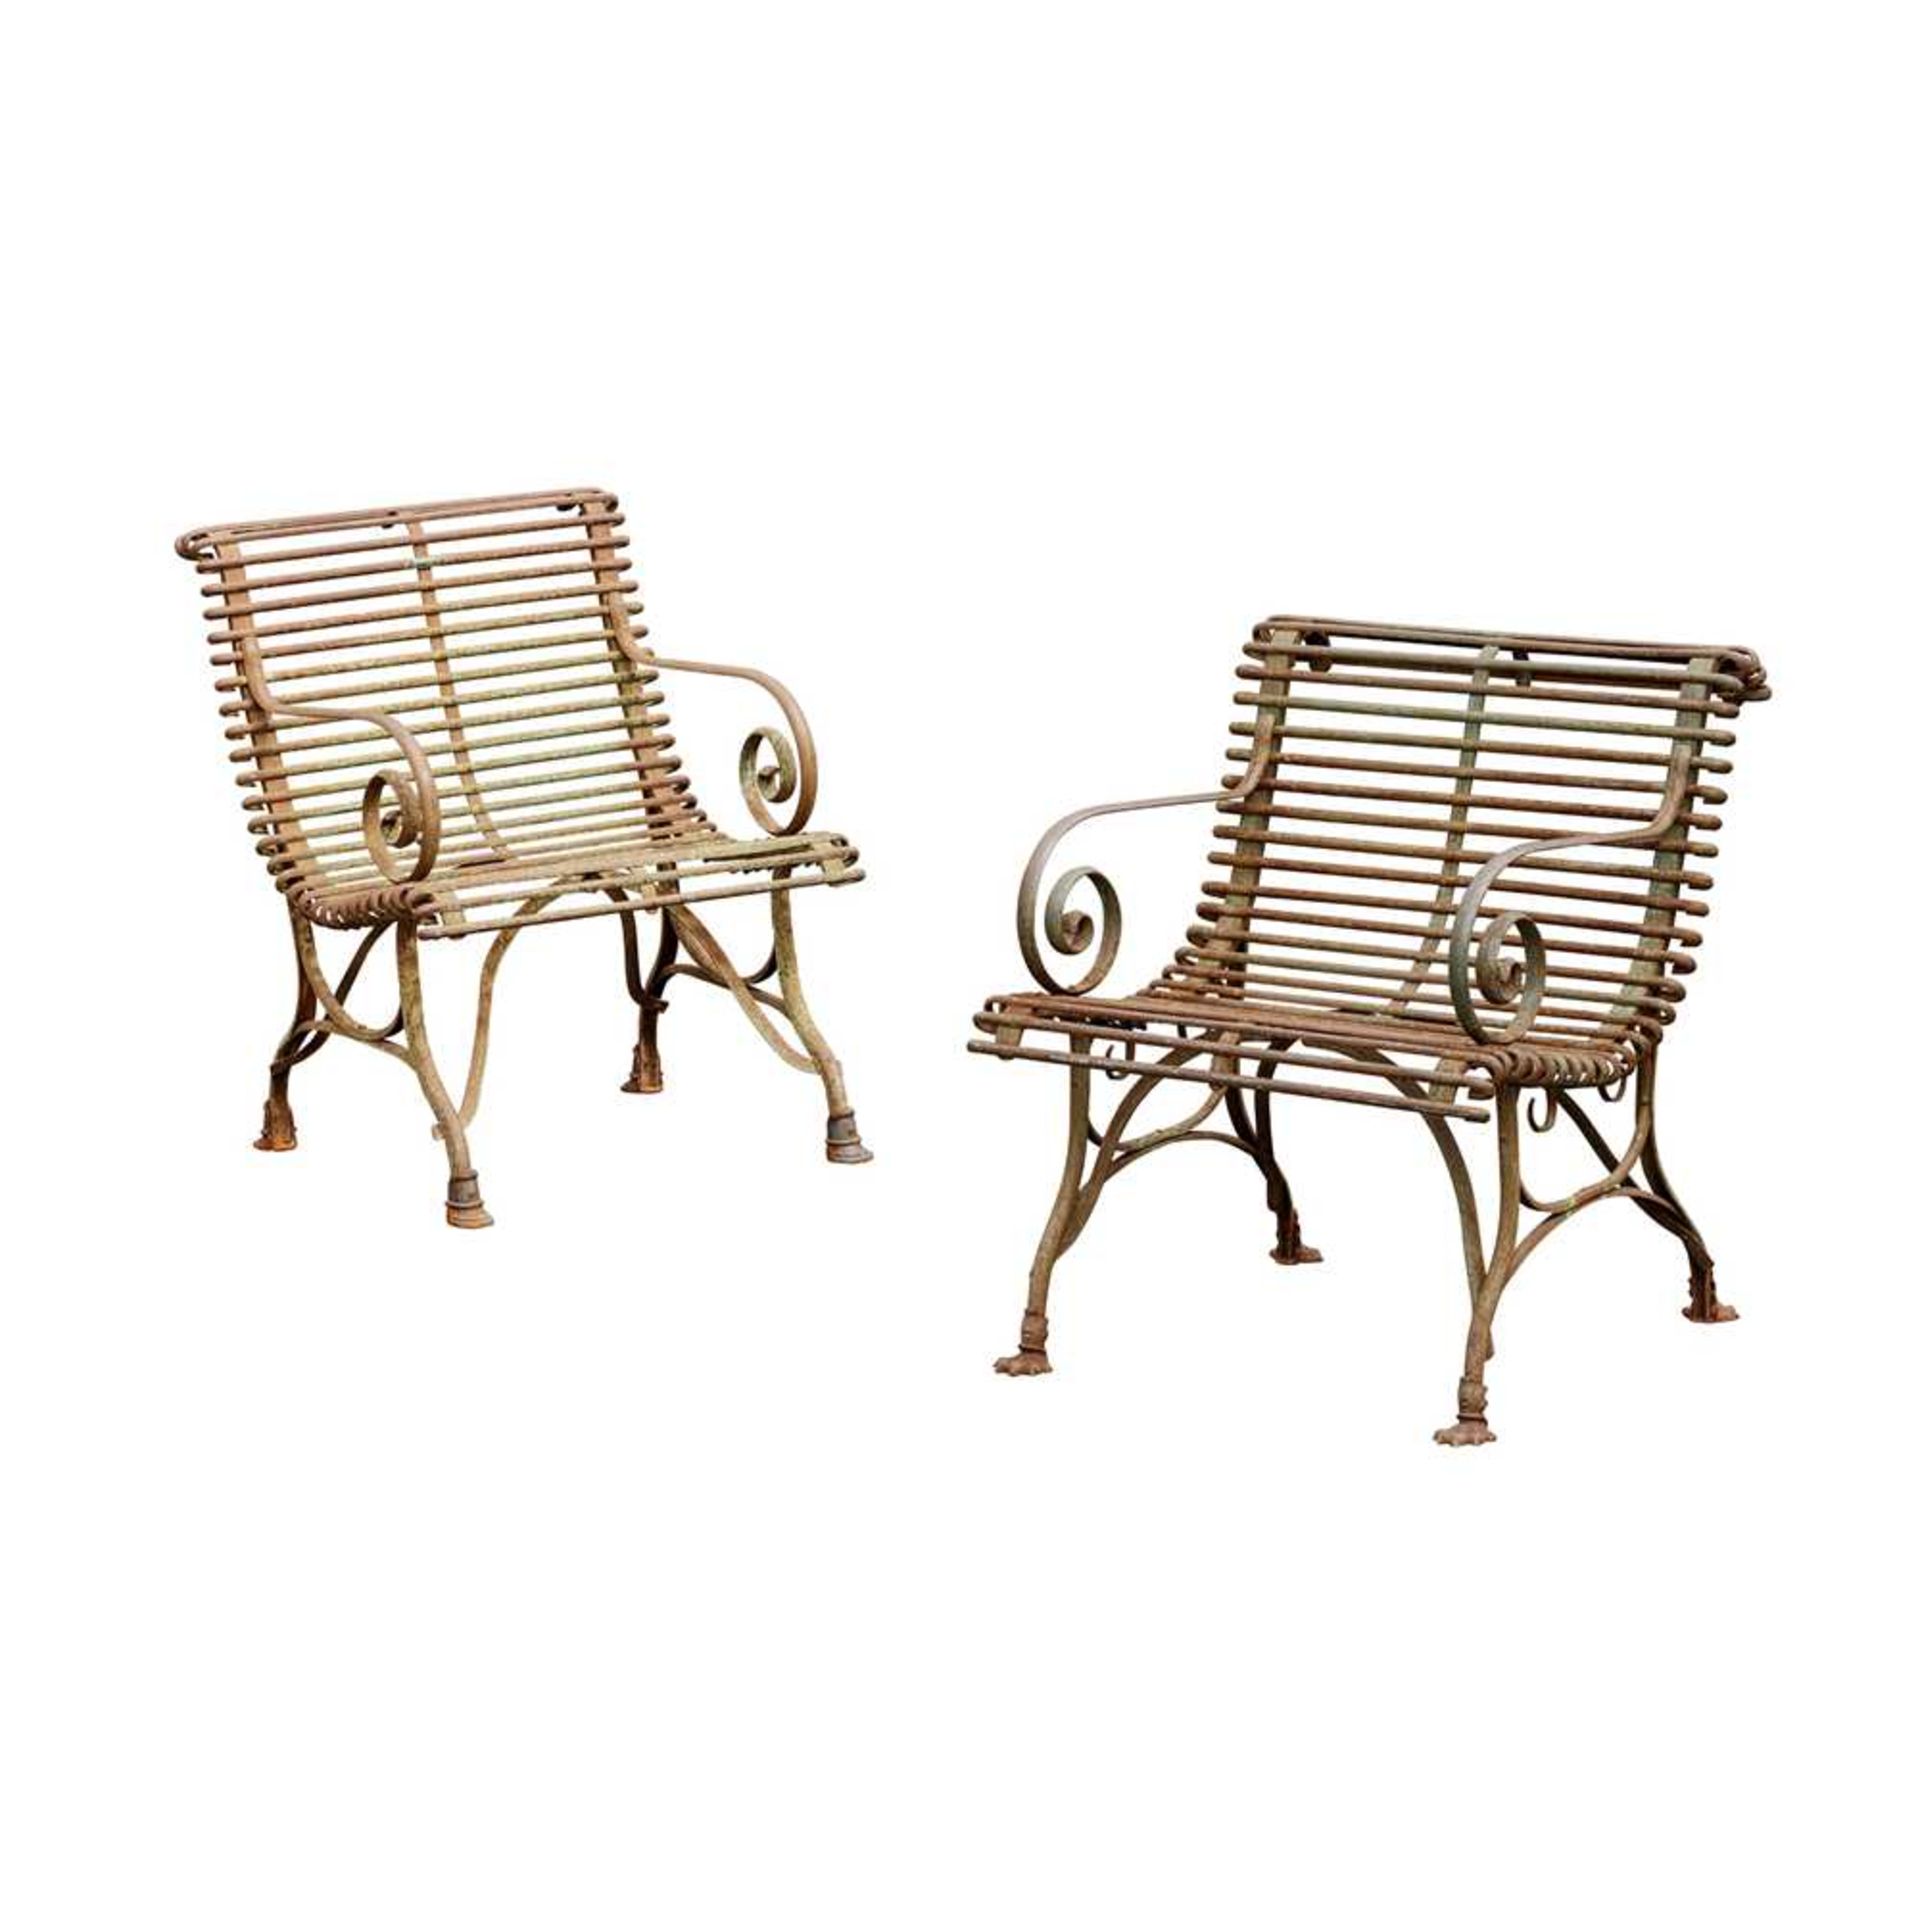 MATCHED PAIR OF ARRAS WROUGHT IRON GARDEN SEATS 19TH CENTURY